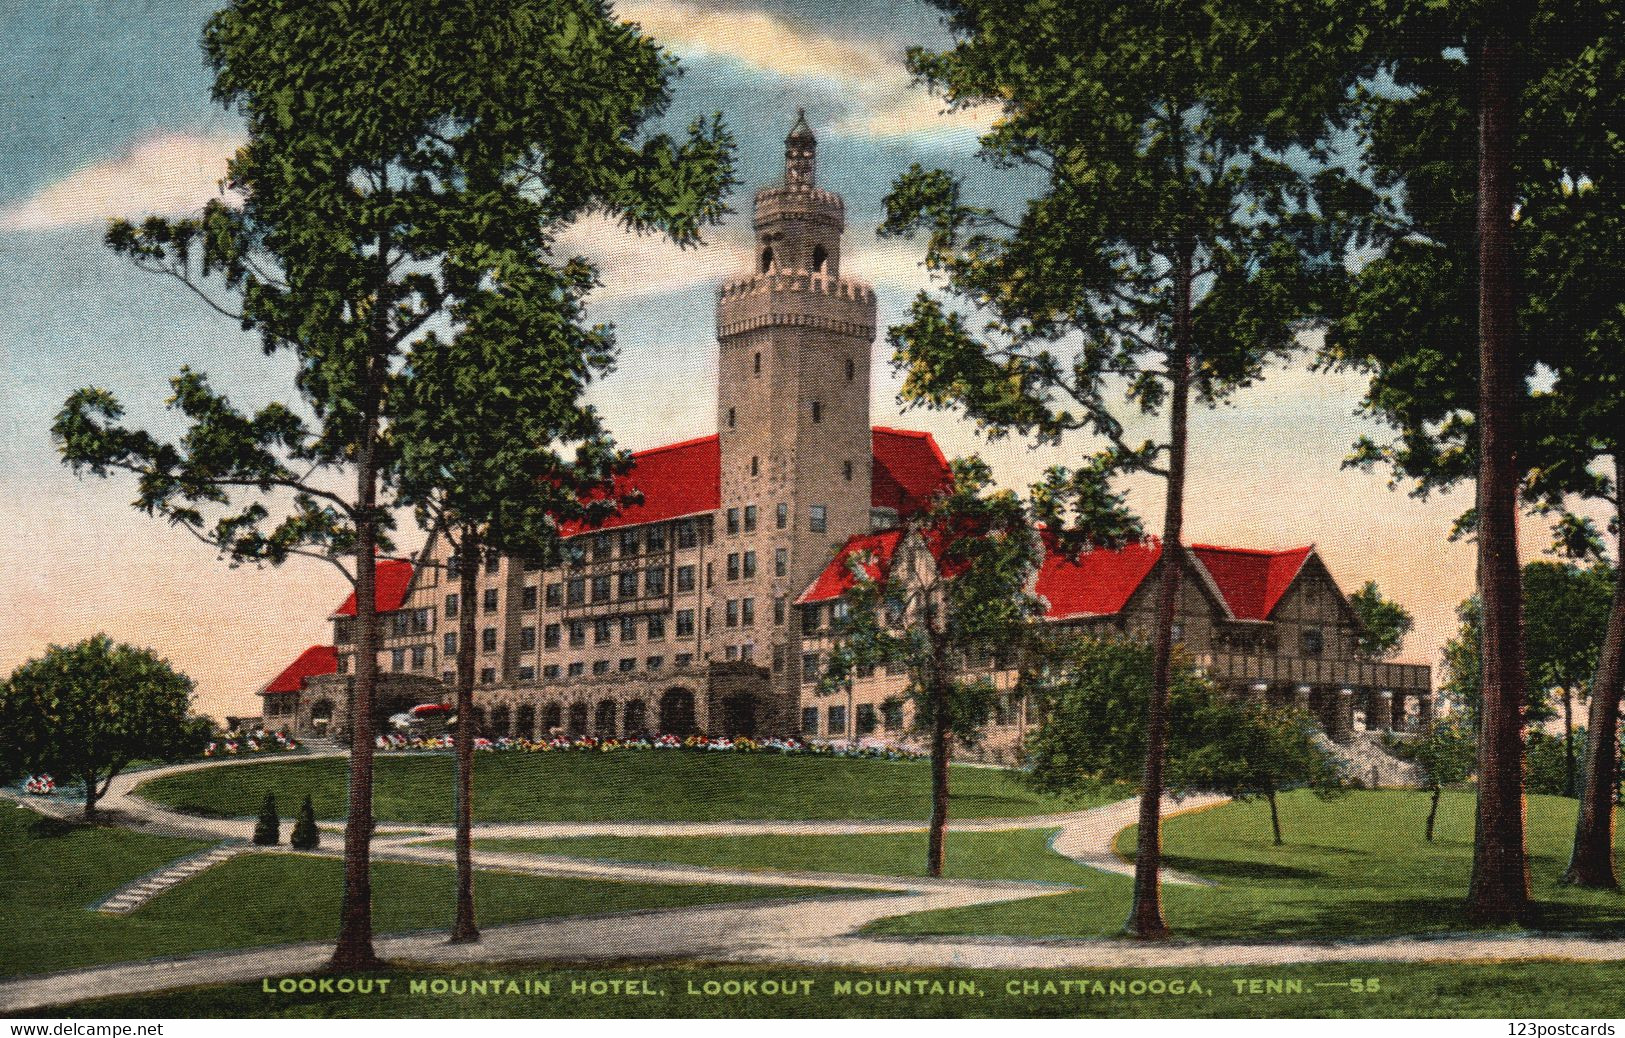 Lookout Mountain Hotel - Lookout Mountain, Chattanooga, Tennessee - Chattanooga